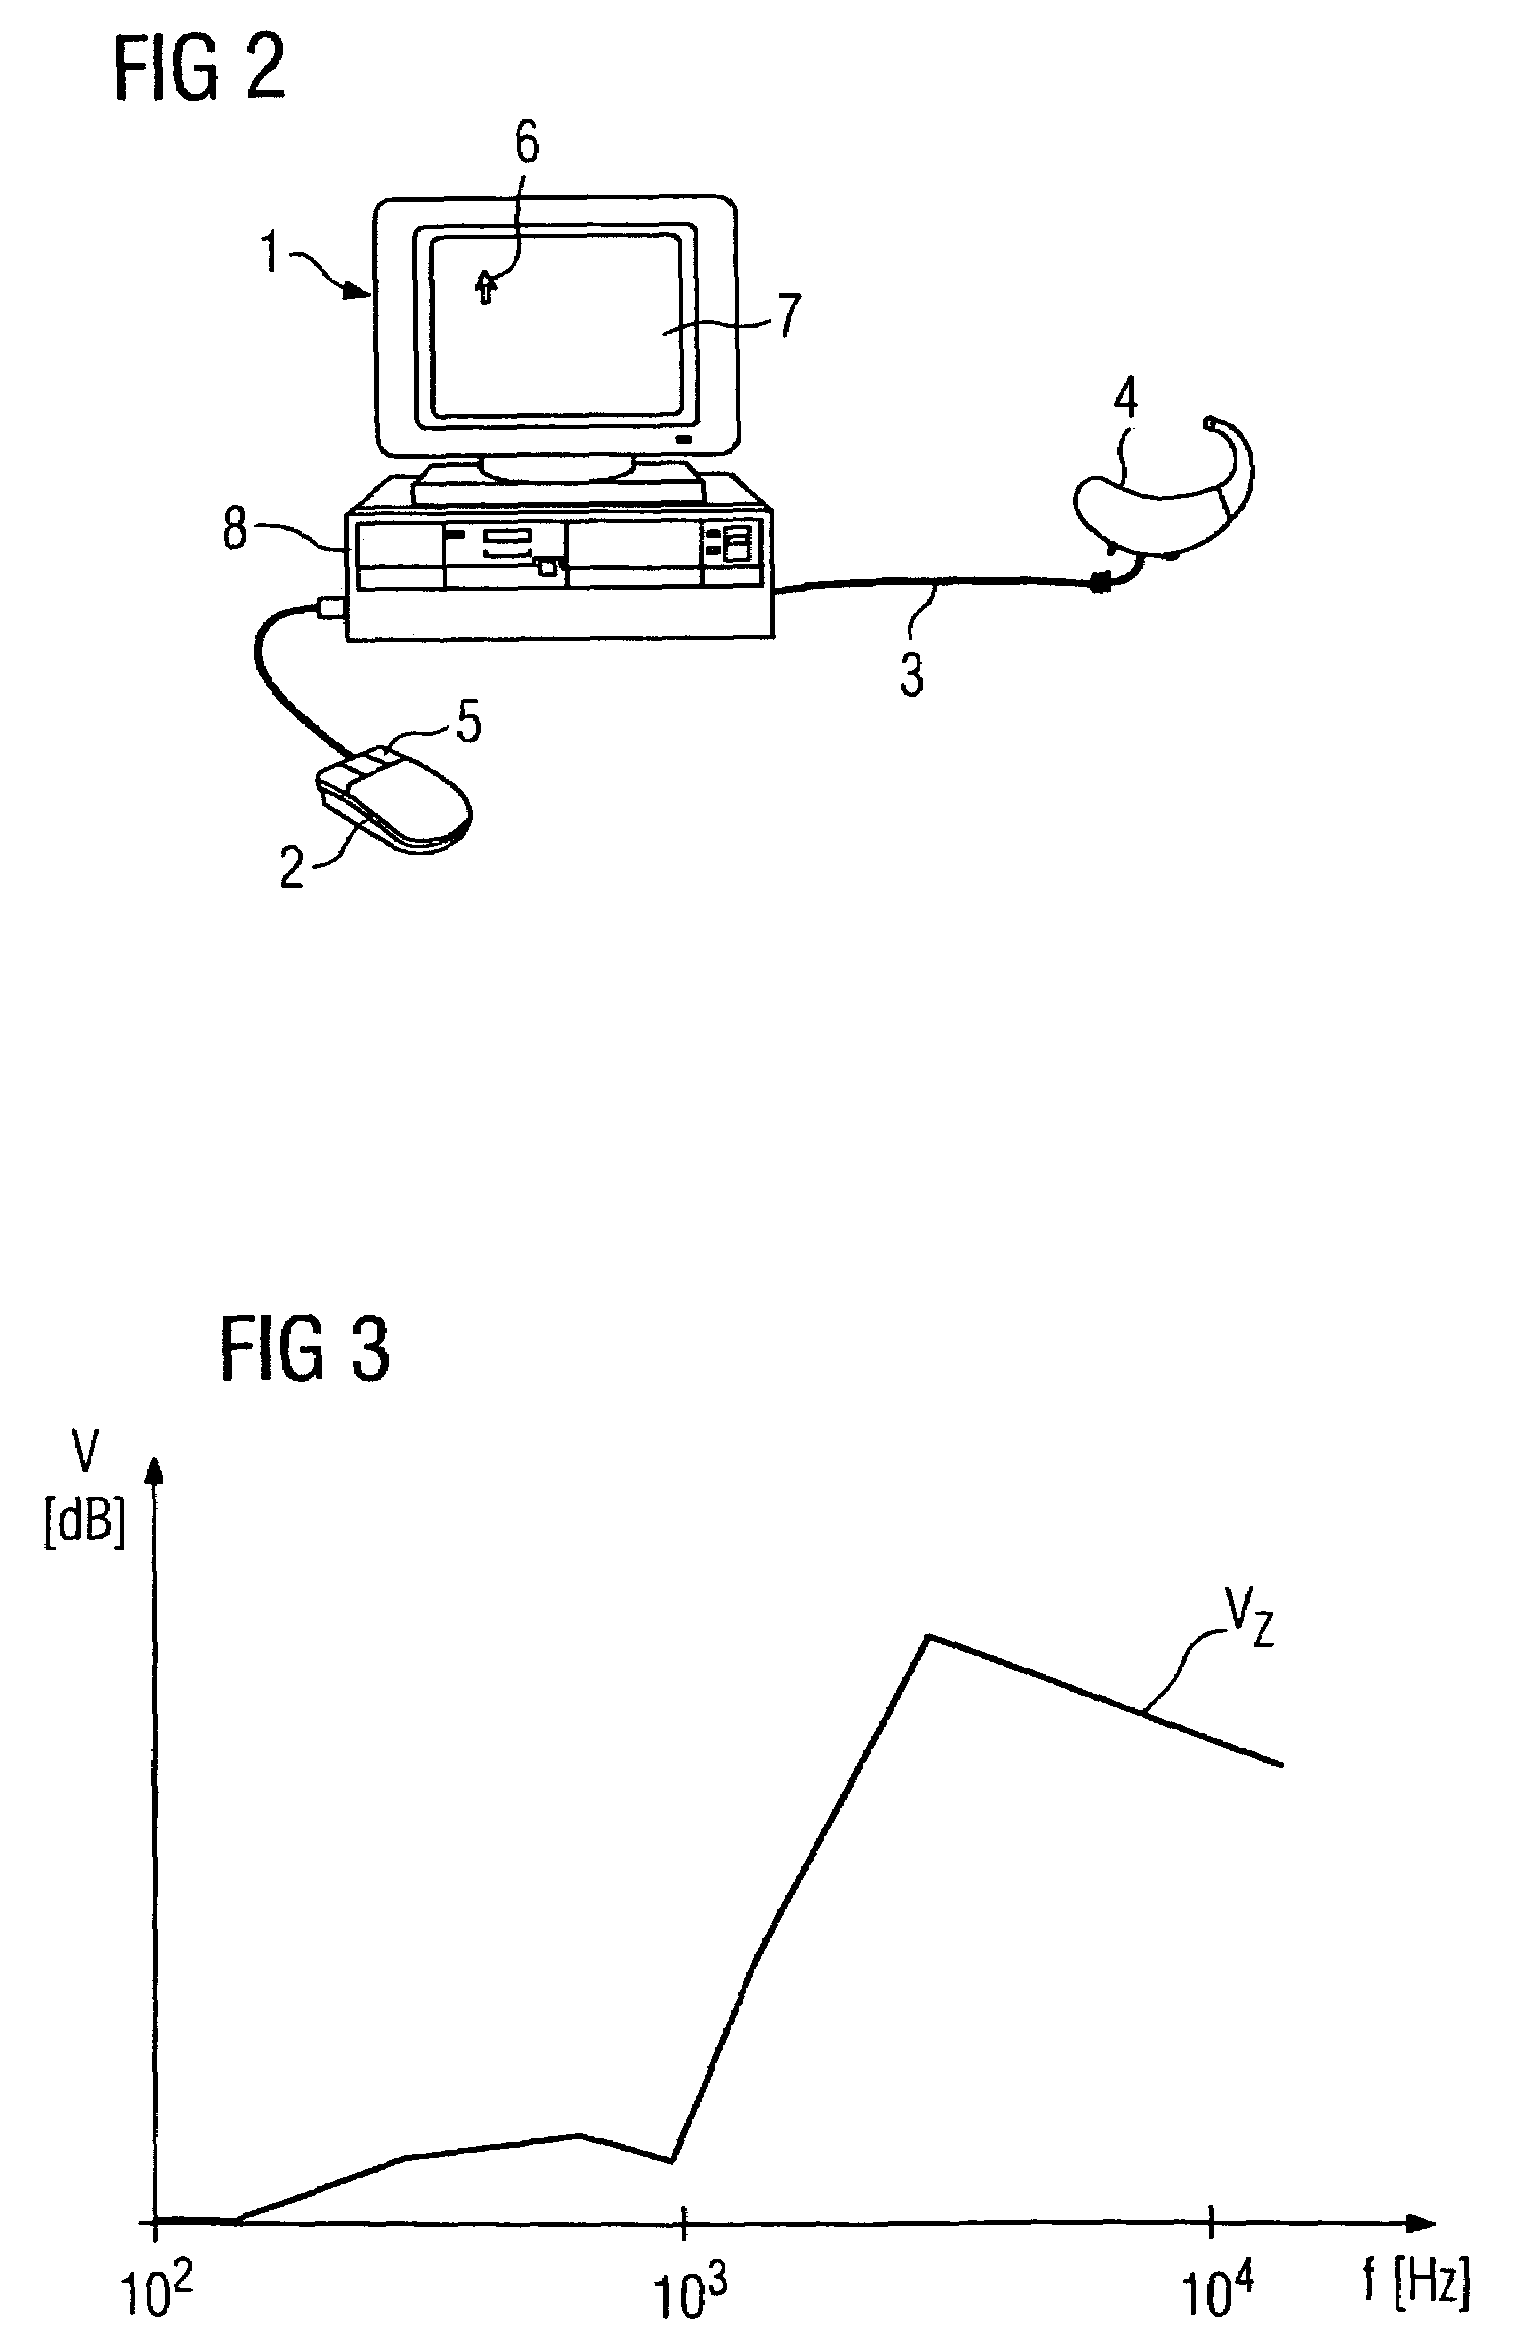 Automatic gain adjustment for a hearing aid device